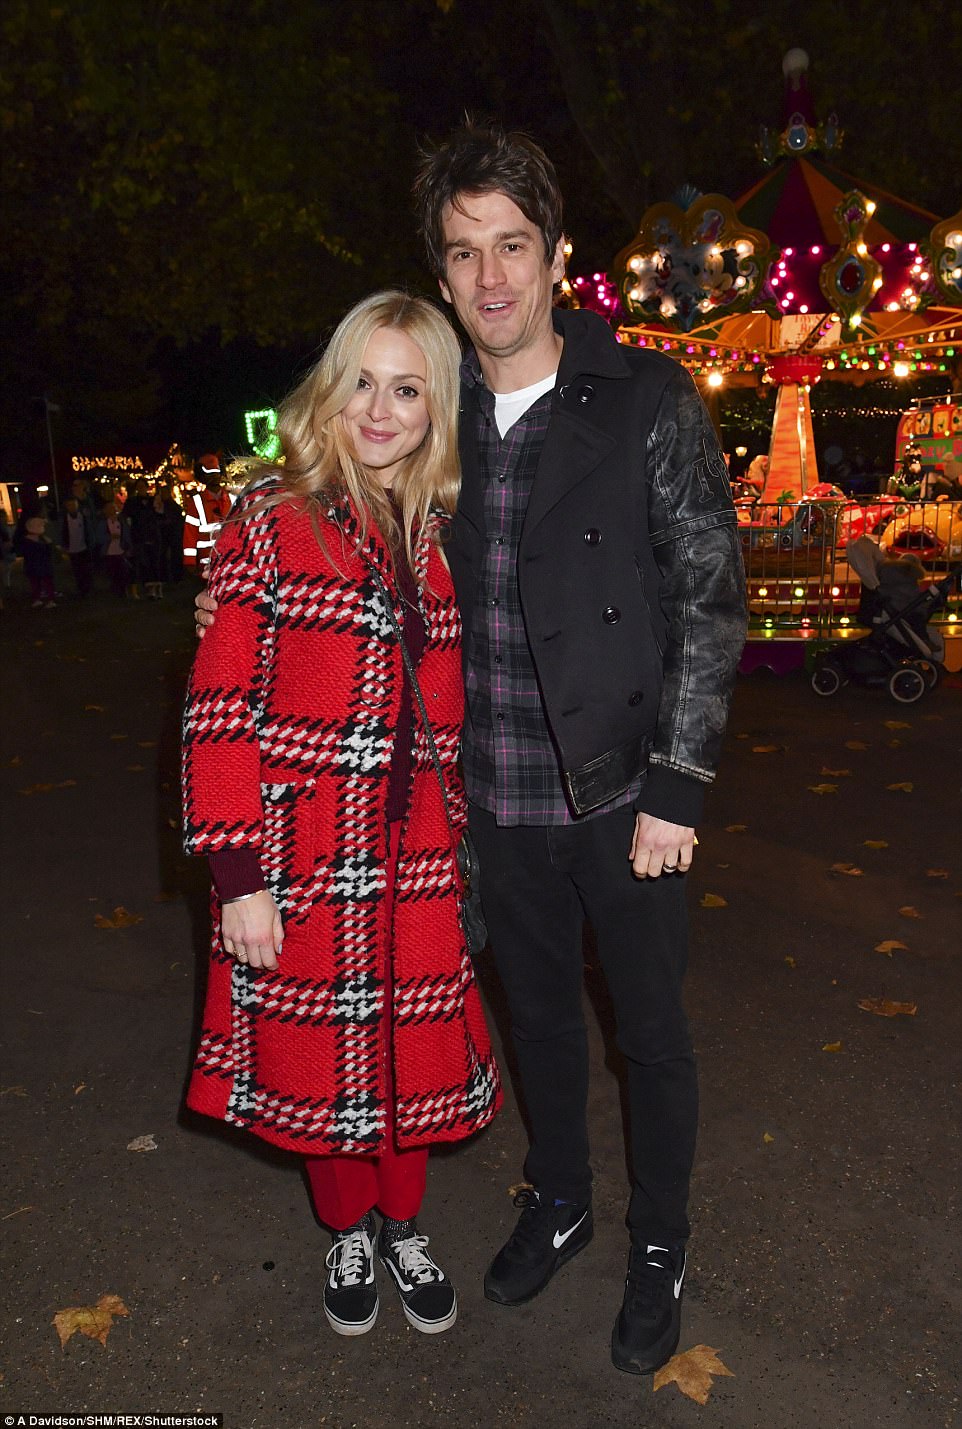 Sweet: The married pair snuggled up to one another at the festive event